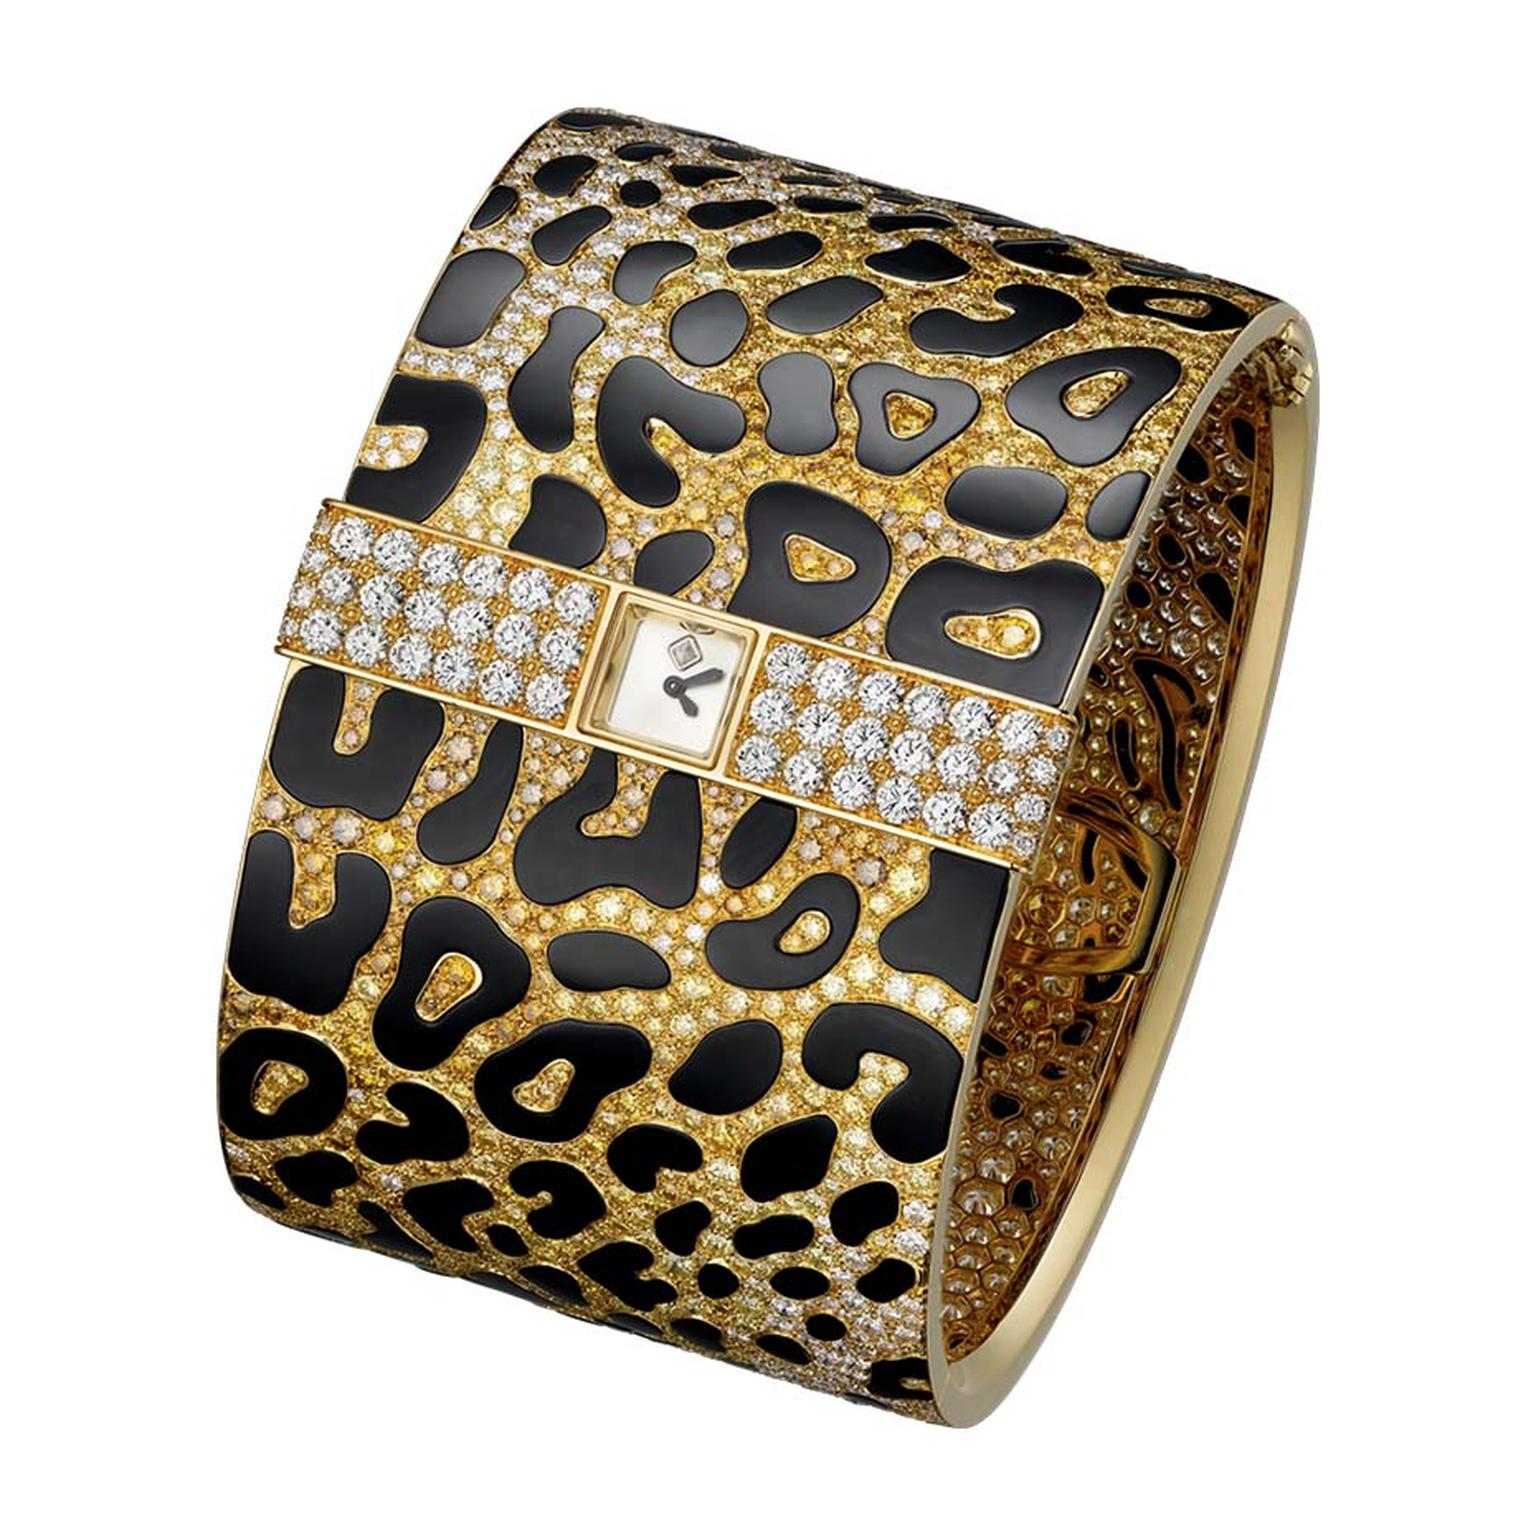 Cartier's Panthère Impériale high jewellery cuff is pavéd with light yellow, light orange, deep orange and brown brilliant-cut diamonds to create the panther's sumptuous coat. The secret watch is diminutive - no larger than the panther's eye - and discree